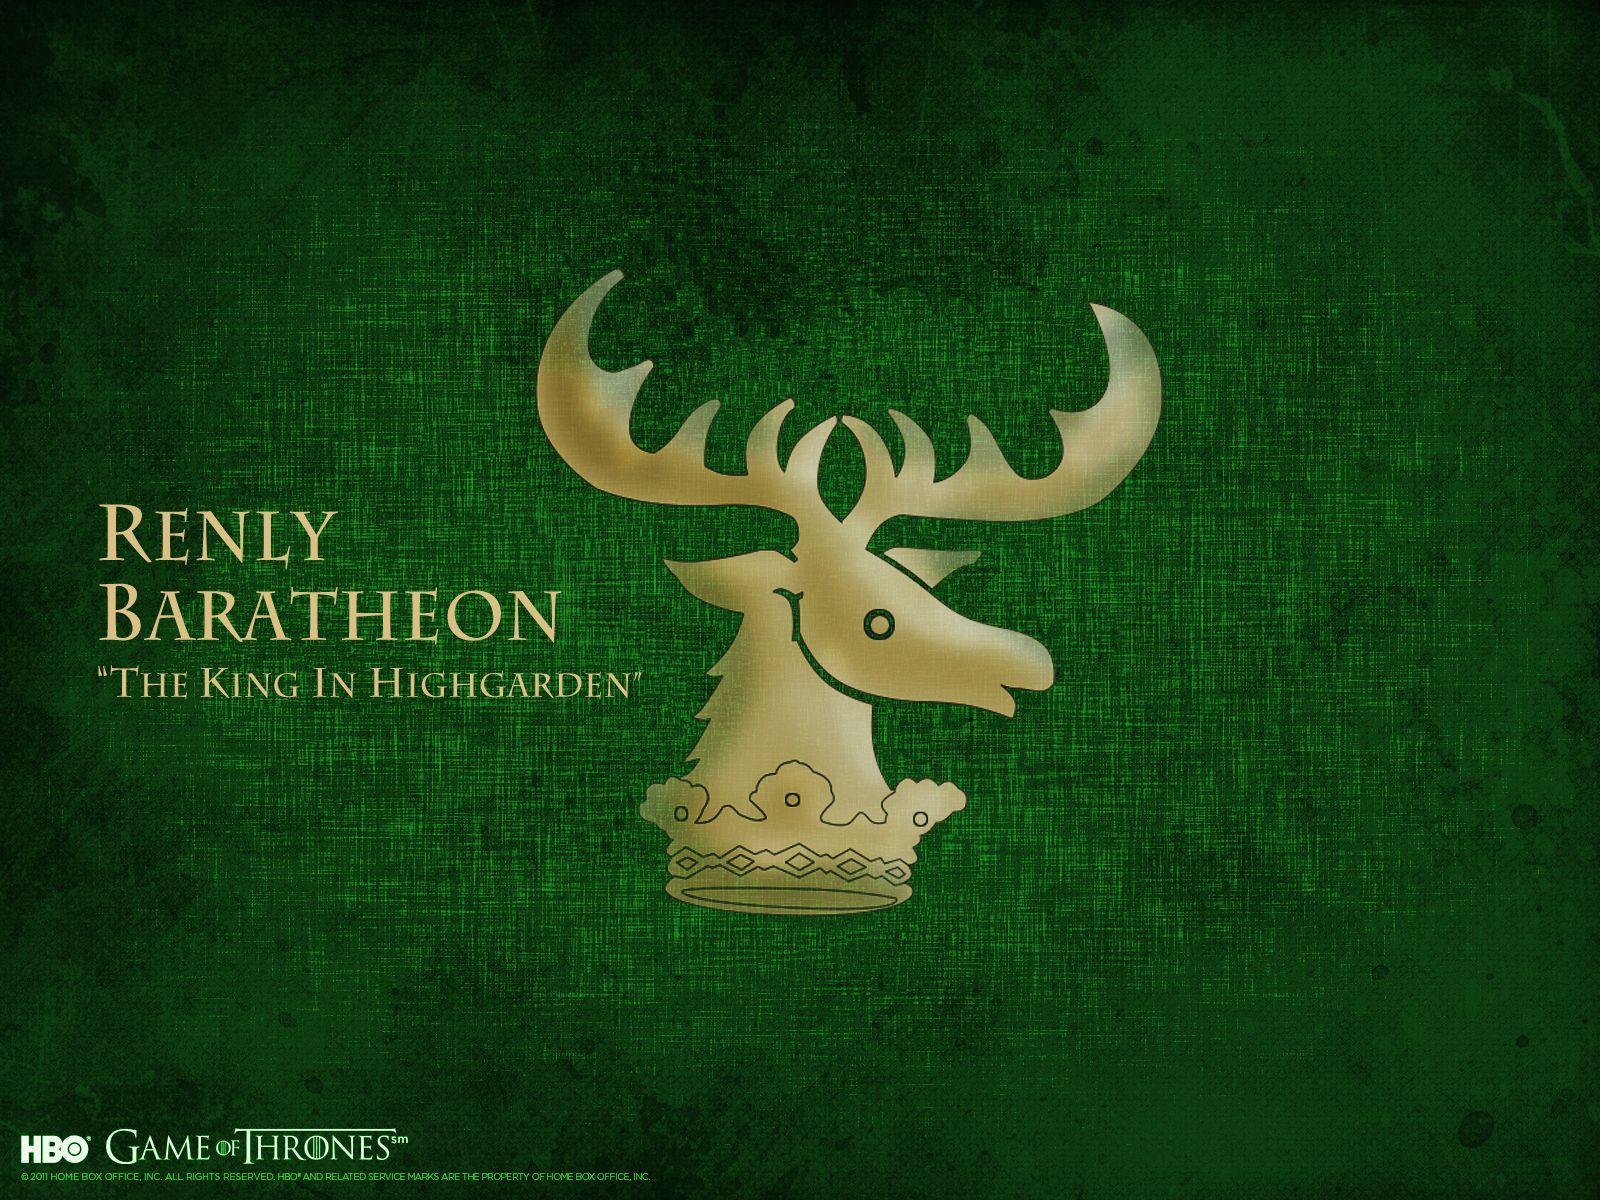 House Baratheon. When you play a game of thrones you win